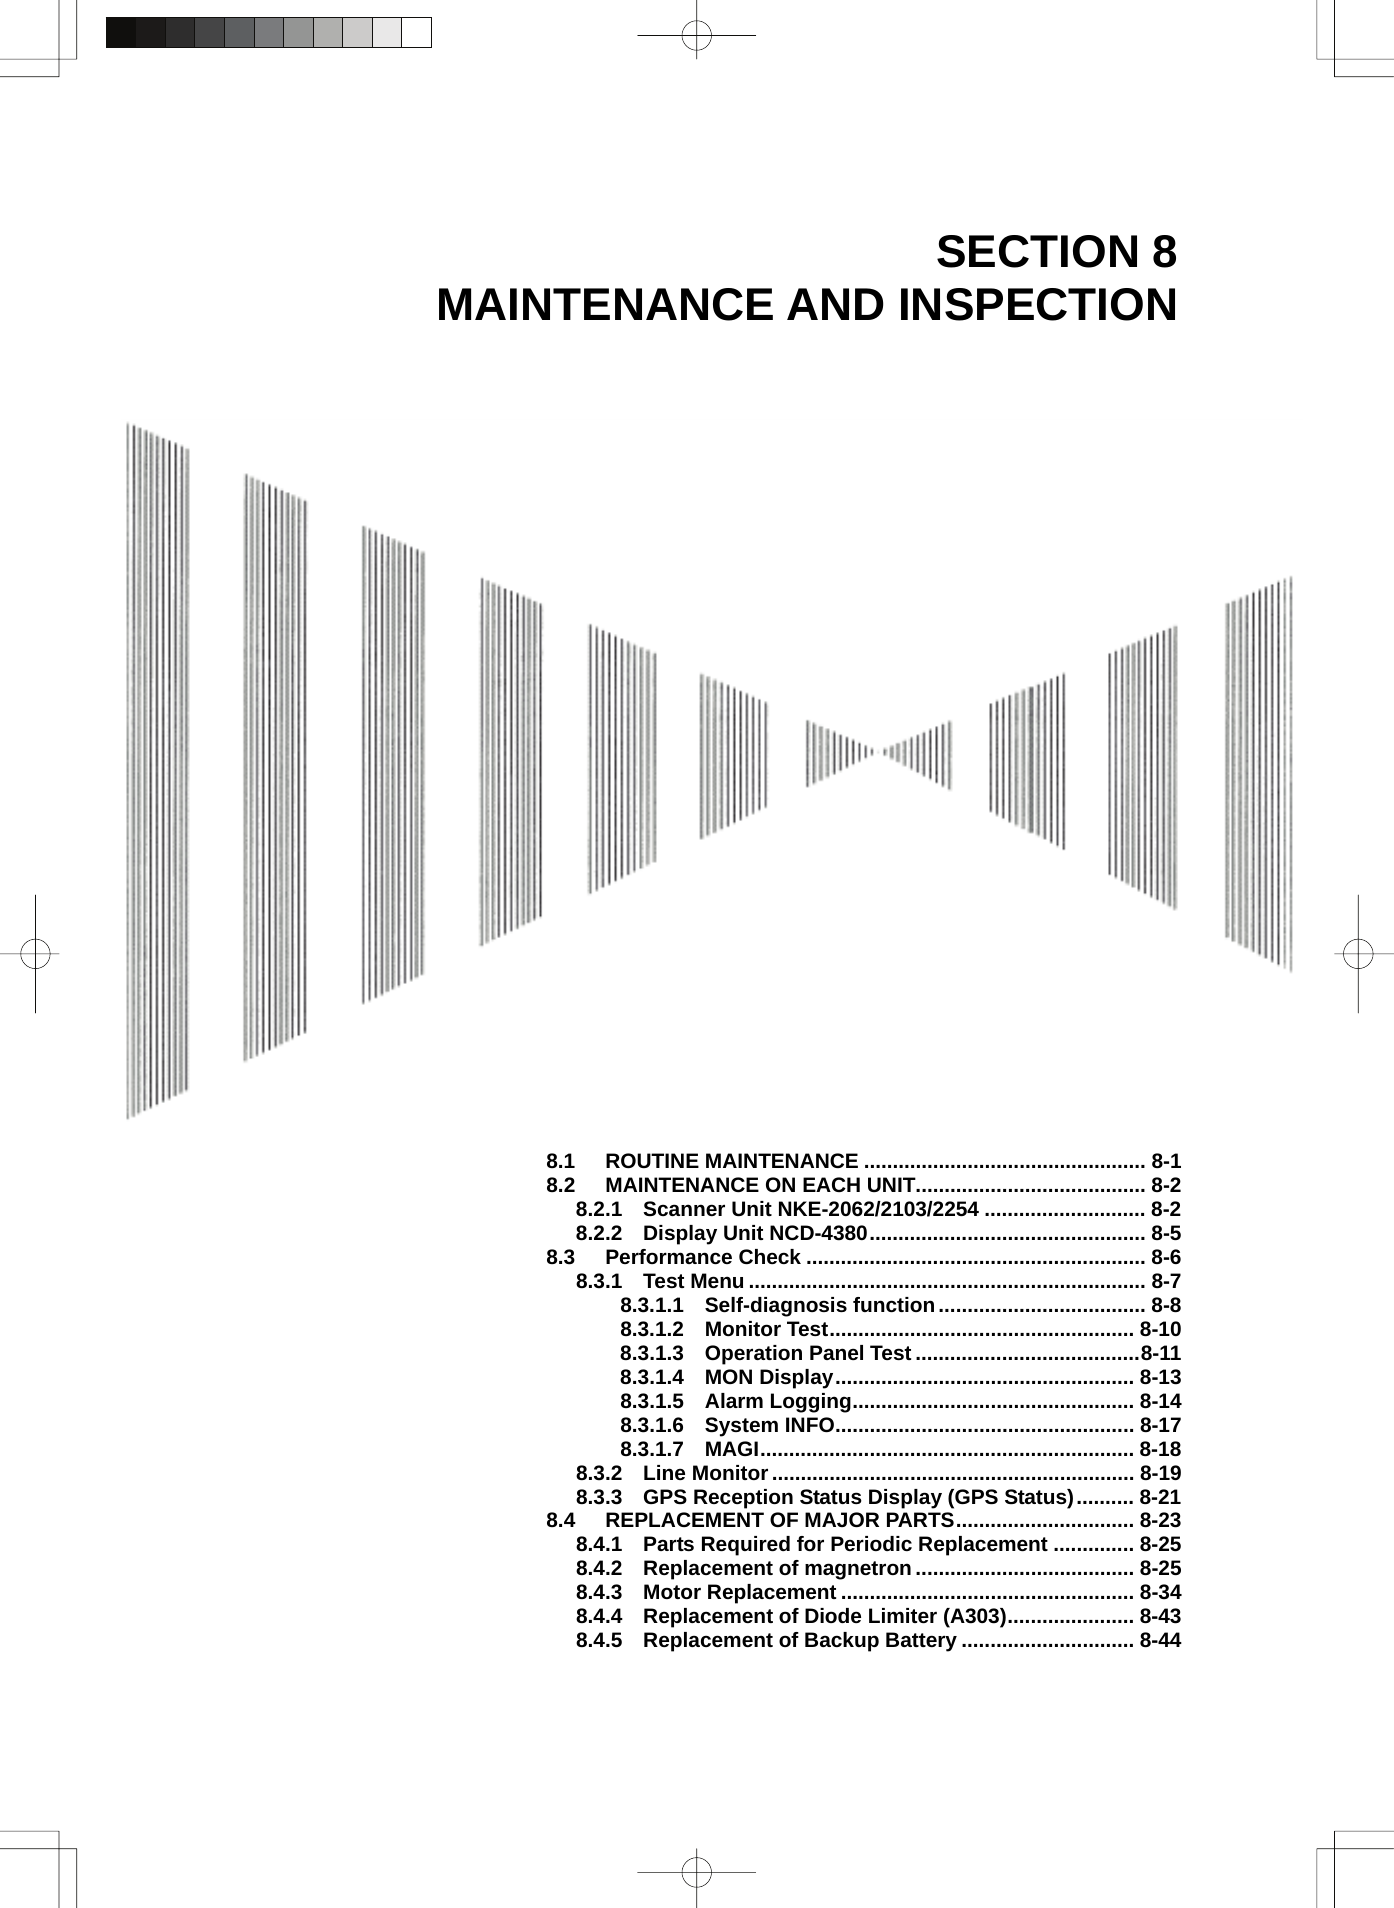  SECTION 8 MAINTENANCE AND INSPECTION                                  8.1 ROUTINE MAINTENANCE ................................................. 8-1 8.2 MAINTENANCE ON EACH UNIT........................................ 8-2 8.2.1  Scanner Unit NKE-2062/2103/2254 ............................ 8-2 8.2.2  Display Unit NCD-4380................................................ 8-5 8.3 Performance Check ........................................................... 8-6 8.3.1  Test Menu ..................................................................... 8-7 8.3.1.1  Self-diagnosis function.................................... 8-8 8.3.1.2  Monitor Test..................................................... 8-10 8.3.1.3  Operation Panel Test .......................................8-11 8.3.1.4  MON Display.................................................... 8-13 8.3.1.5  Alarm Logging................................................. 8-14 8.3.1.6  System INFO.................................................... 8-17 8.3.1.7  MAGI................................................................. 8-18 8.3.2  Line Monitor............................................................... 8-19 8.3.3    GPS Reception Status Display (GPS Status).......... 8-21 8.4 REPLACEMENT OF MAJOR PARTS............................... 8-23 8.4.1  Parts Required for Periodic Replacement .............. 8-25 8.4.2  Replacement of magnetron ...................................... 8-25 8.4.3  Motor Replacement ................................................... 8-34 8.4.4  Replacement of Diode Limiter (A303)...................... 8-43 8.4.5  Replacement of Backup Battery .............................. 8-44  